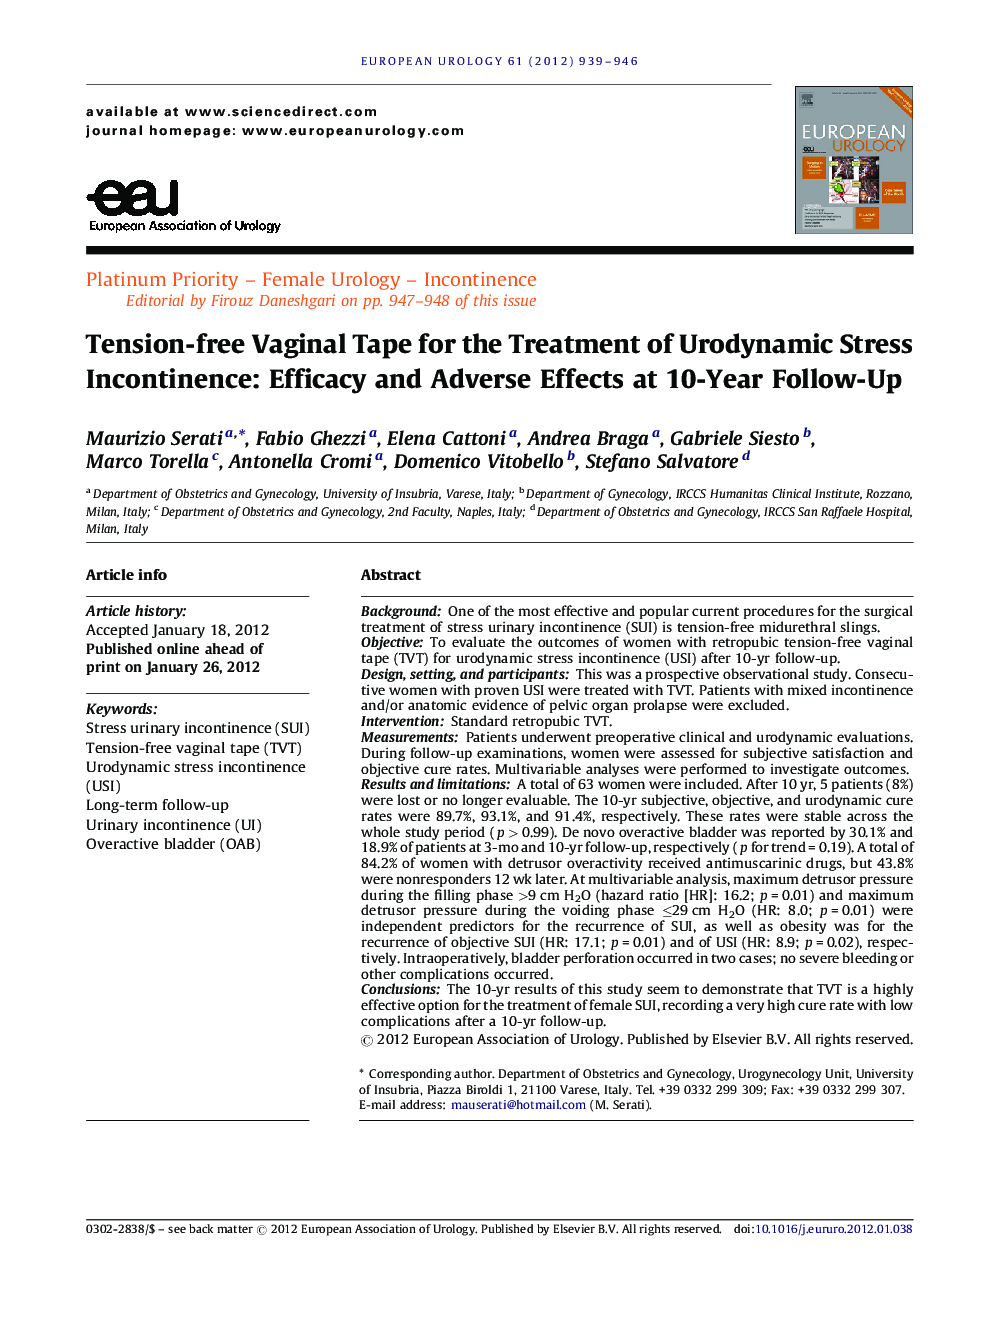 Tension-free Vaginal Tape for the Treatment of Urodynamic Stress Incontinence: Efficacy and Adverse Effects at 10-Year Follow-Up